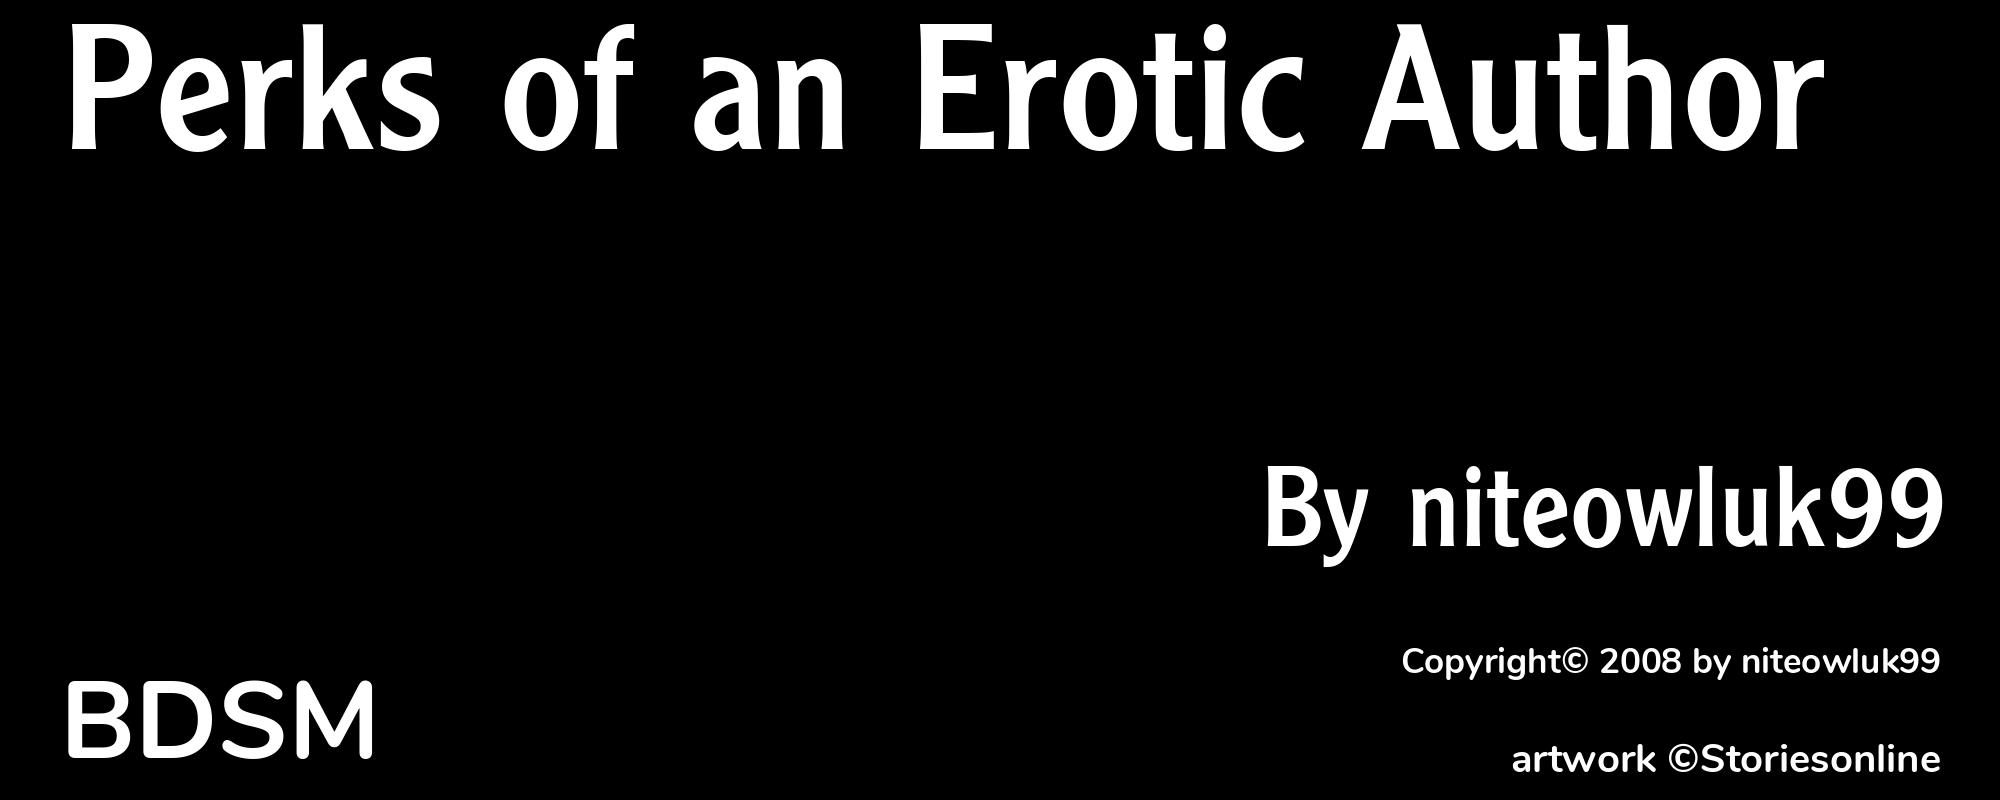 Perks of an Erotic Author - Cover